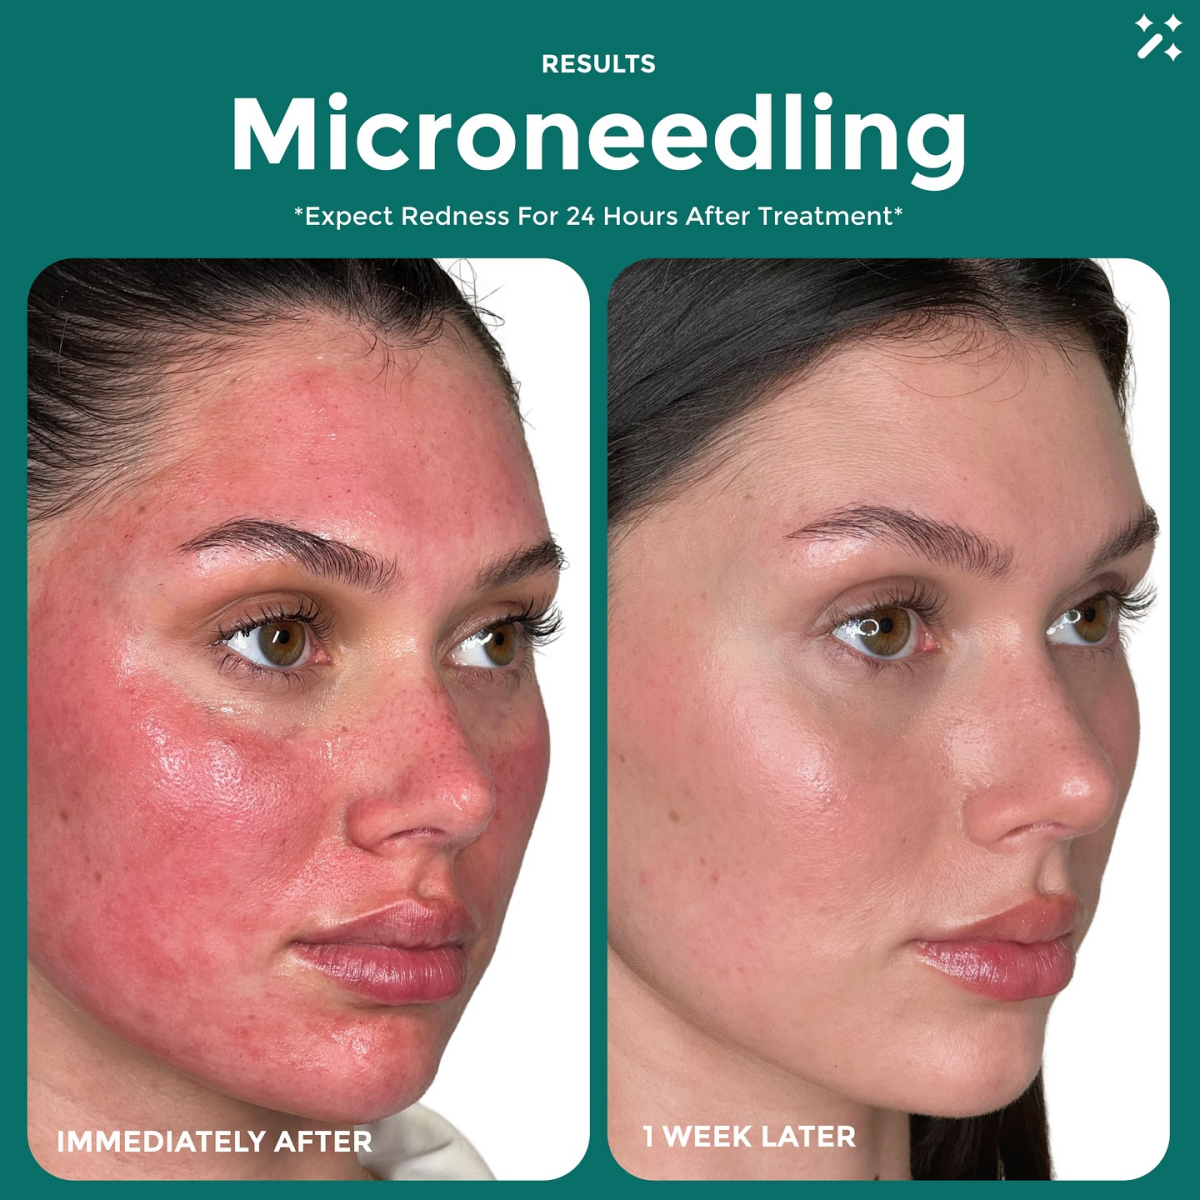 results of microneedling treatment before and after